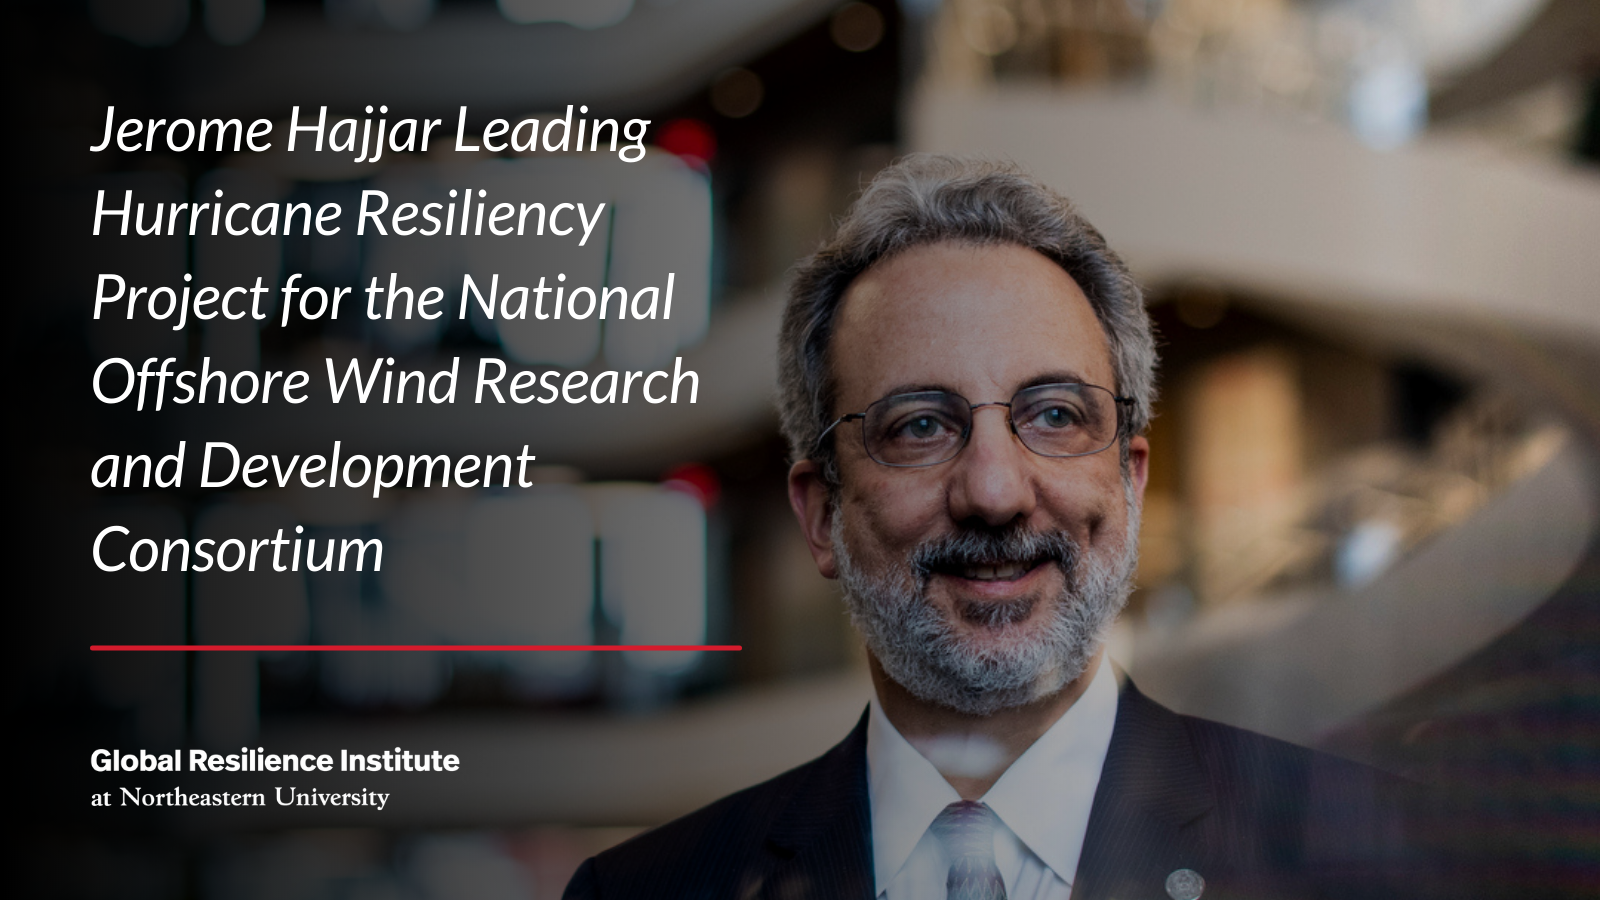 Jerome Hajjar Leading Hurricane Resiliency Project for the National Offshore Wind Research and Development Consortium